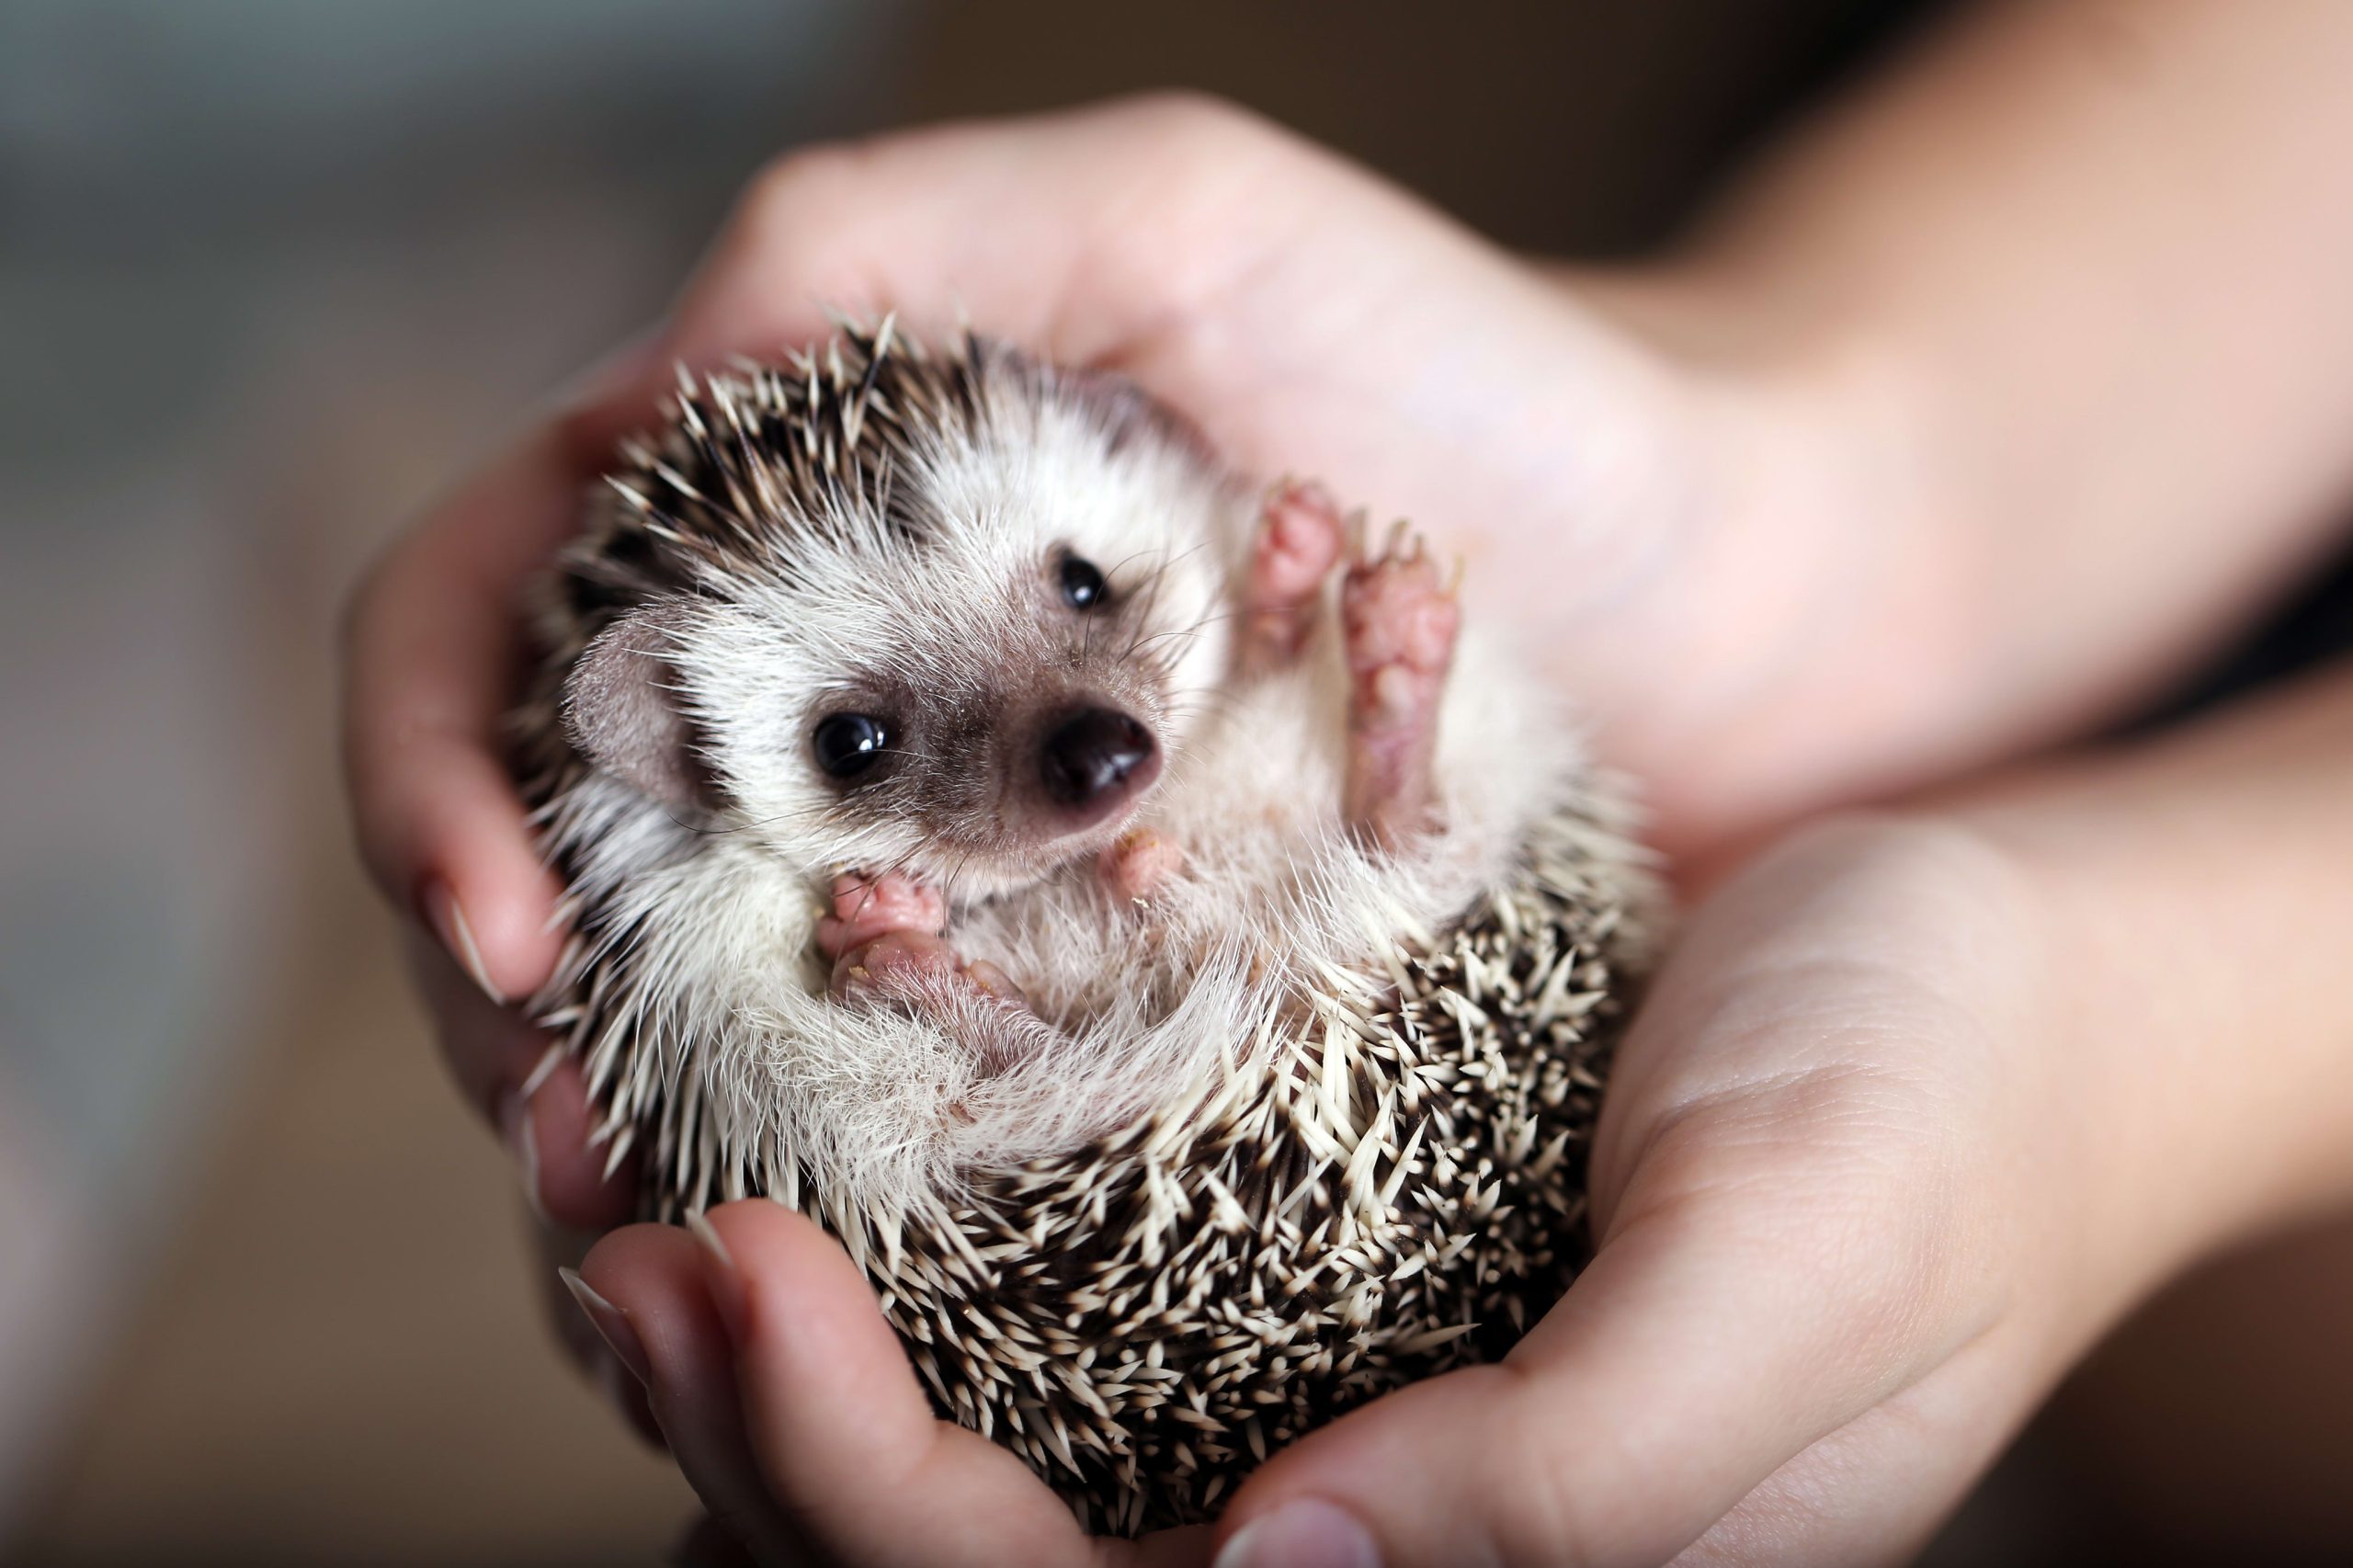 The Art of Defense: How Hedgehogs Protect Themselves